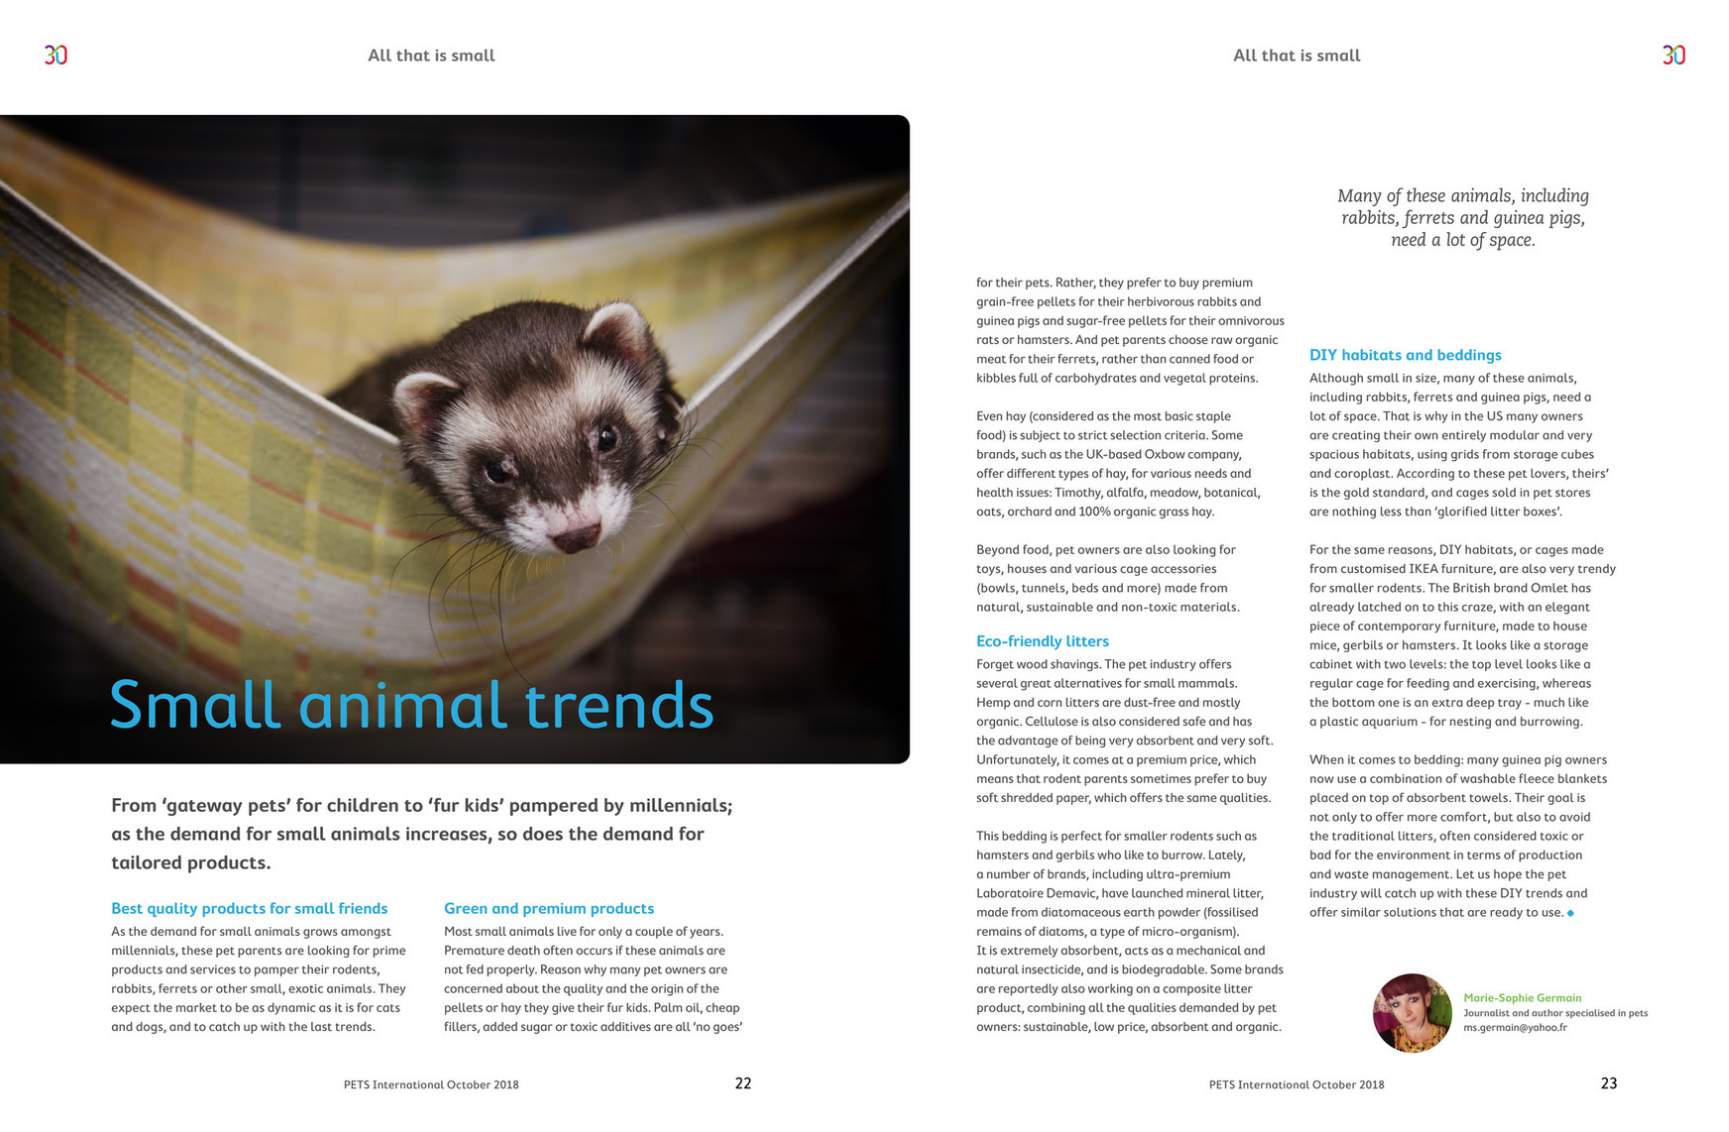 Small animal trends - GlobalPets october 2018